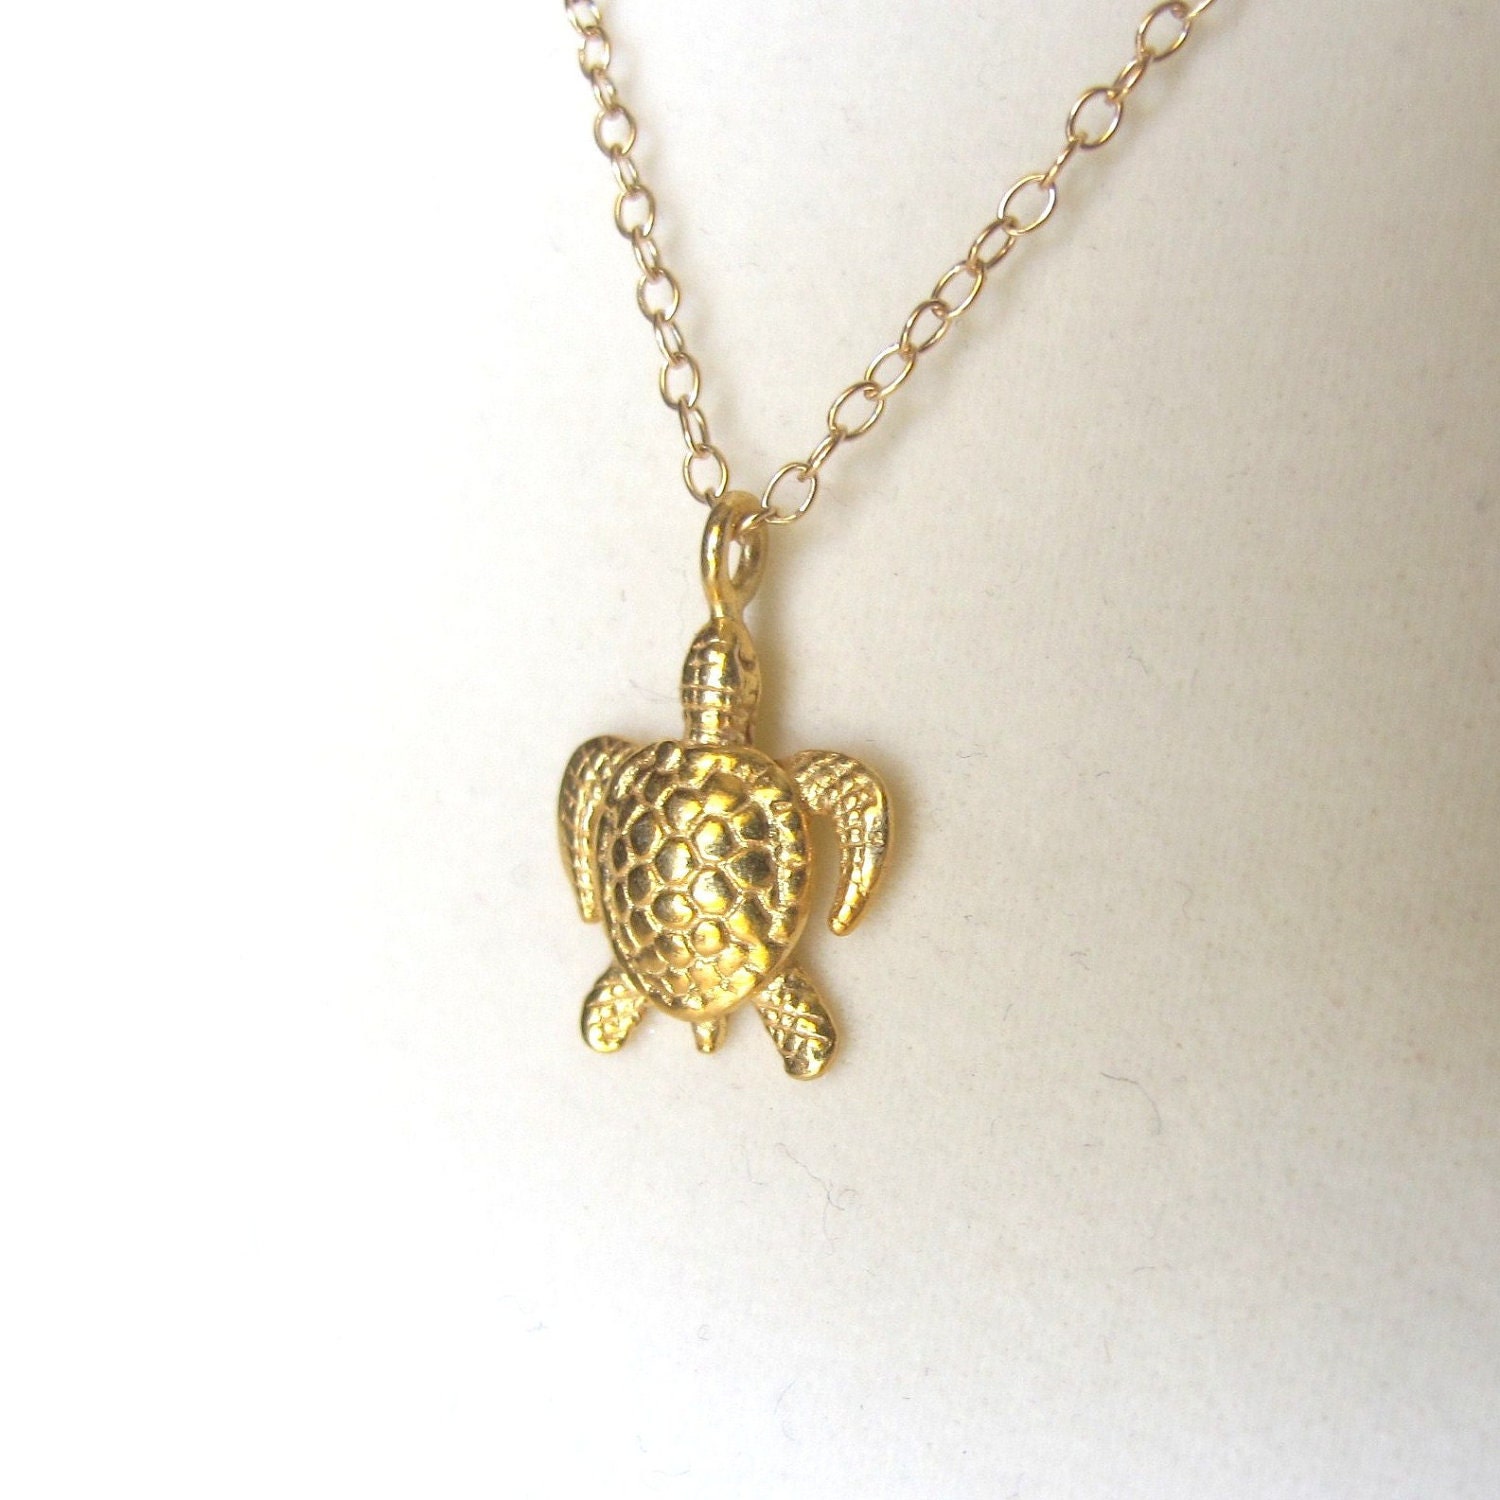 Turtle Necklace from Cougar Town small gold turtle pendant